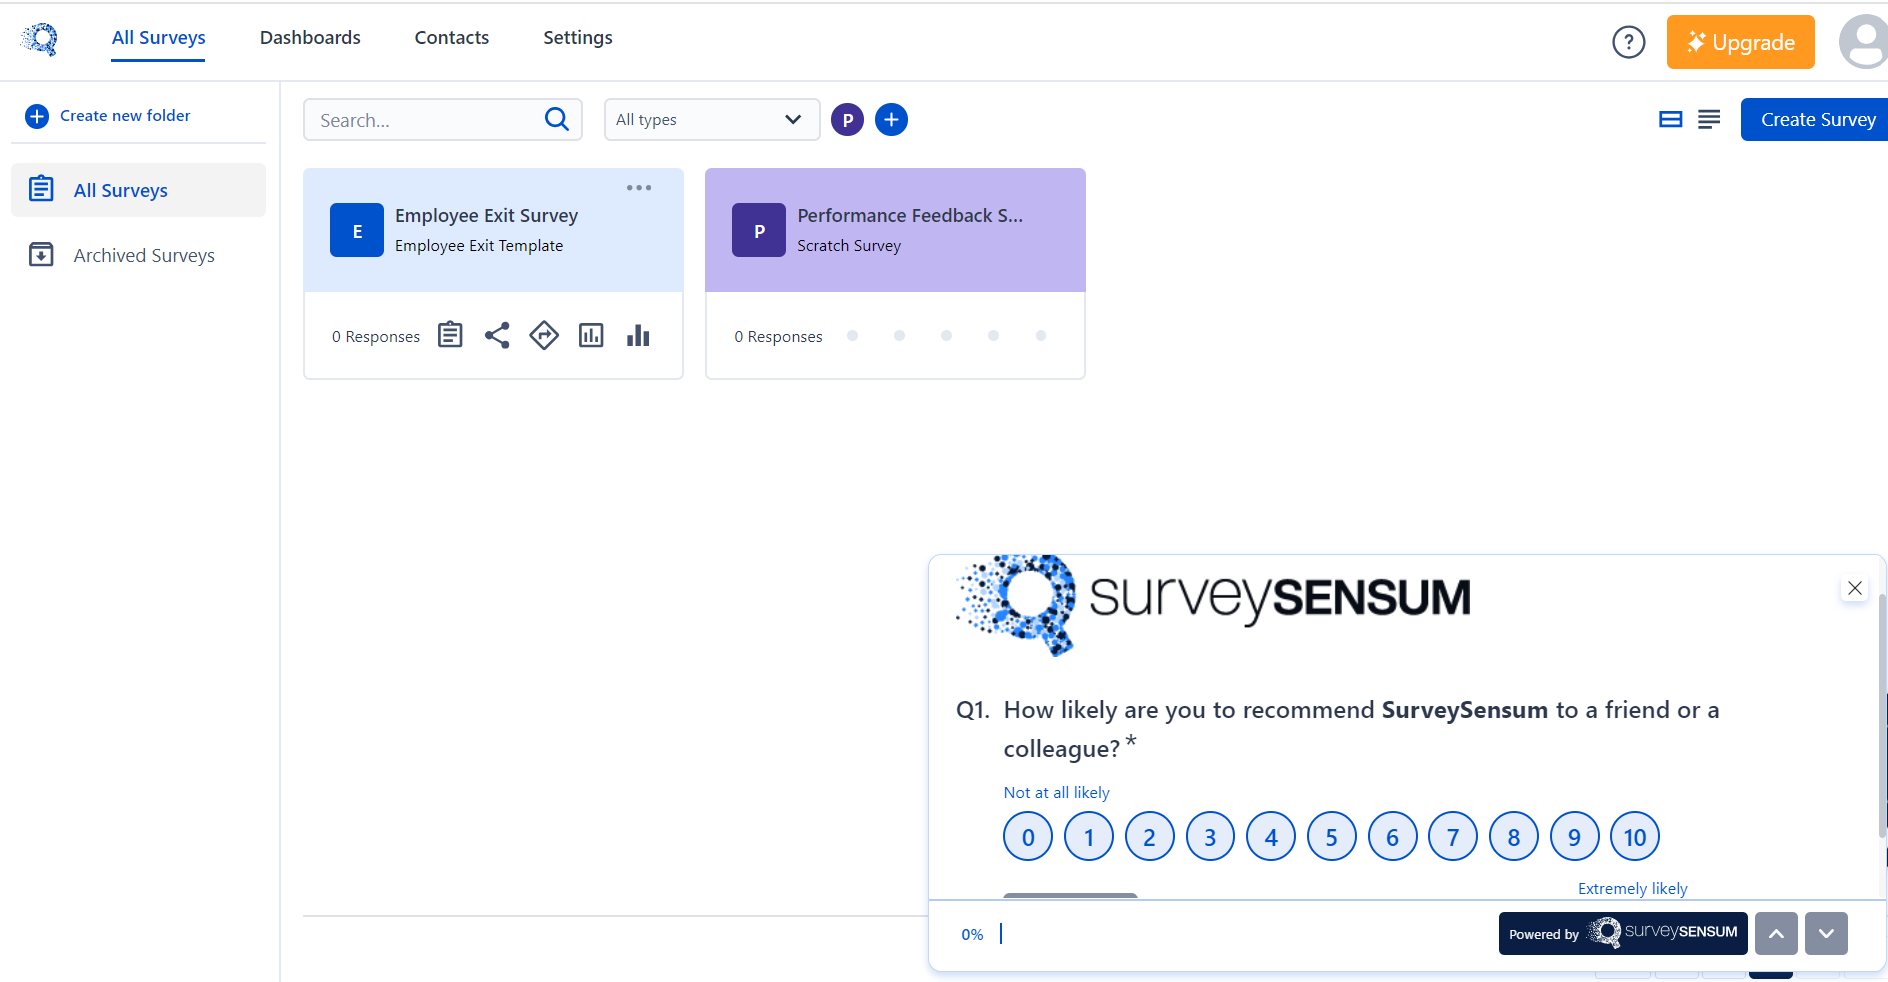 This is the image of a popup survey shown on the SurveySensum website asking users how likely they are to recommend SurveySensum to friends and colleagues. 